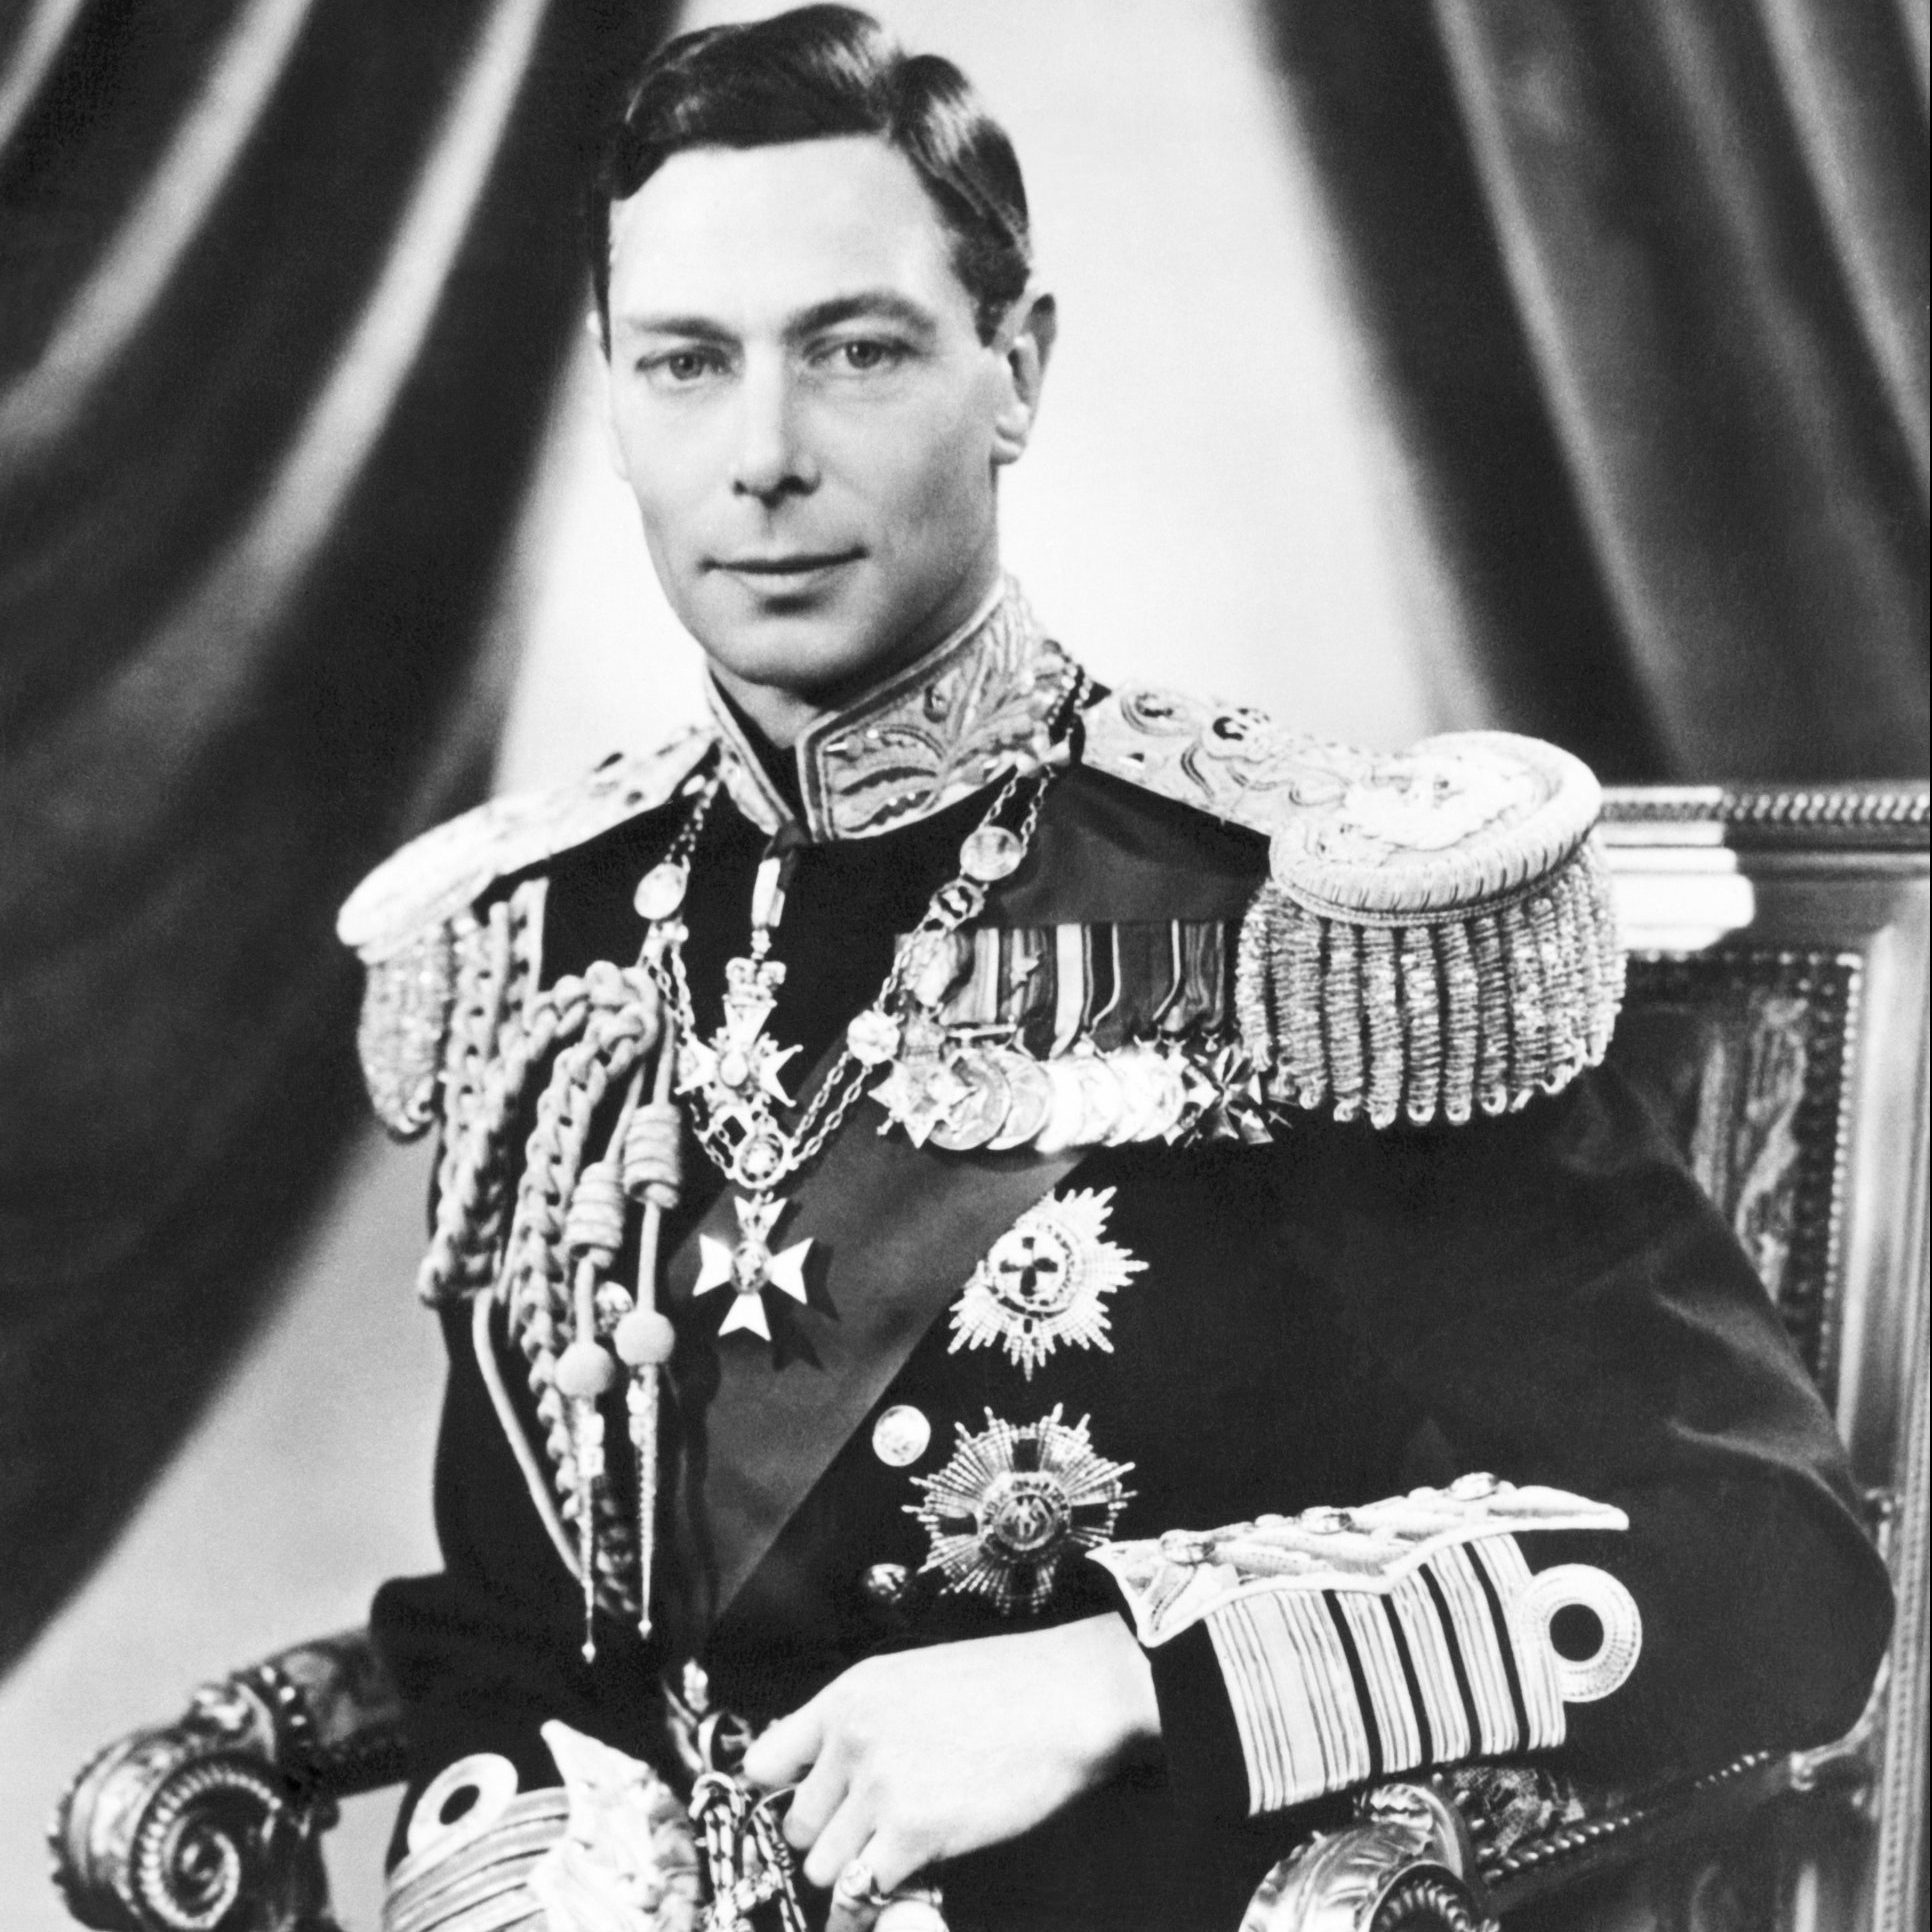 His Majesty King George VI, wearing his uniform as Admiral of the Fleet, London, England, May 4, 1937. He served as a gunner during World War I at the Battle of Jutland. (Photo by Underwood Archives/Getty Images)